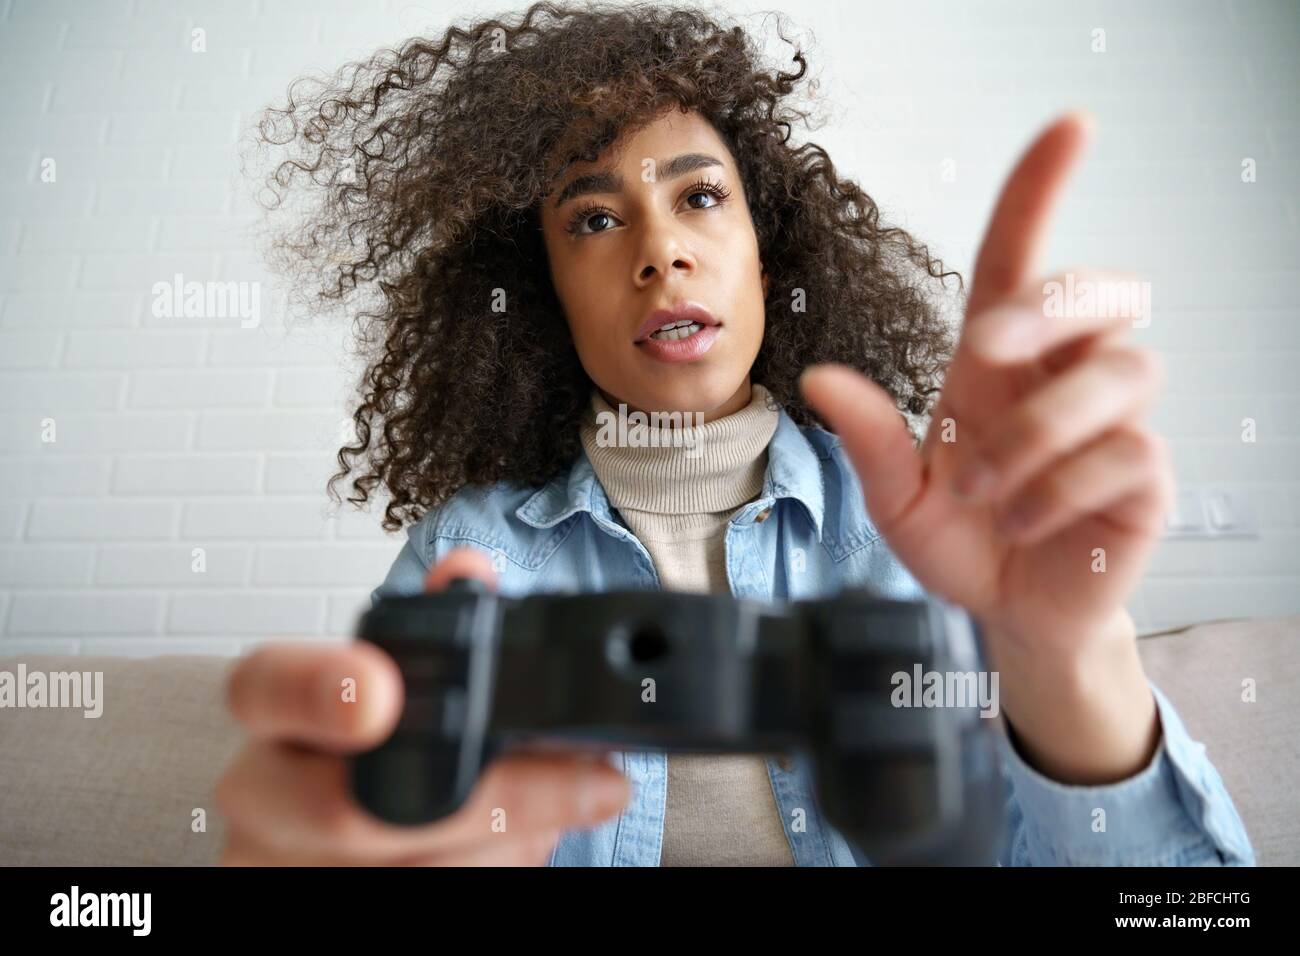 Young african girl gamer holding joystick controller playing video game. Stock Photo